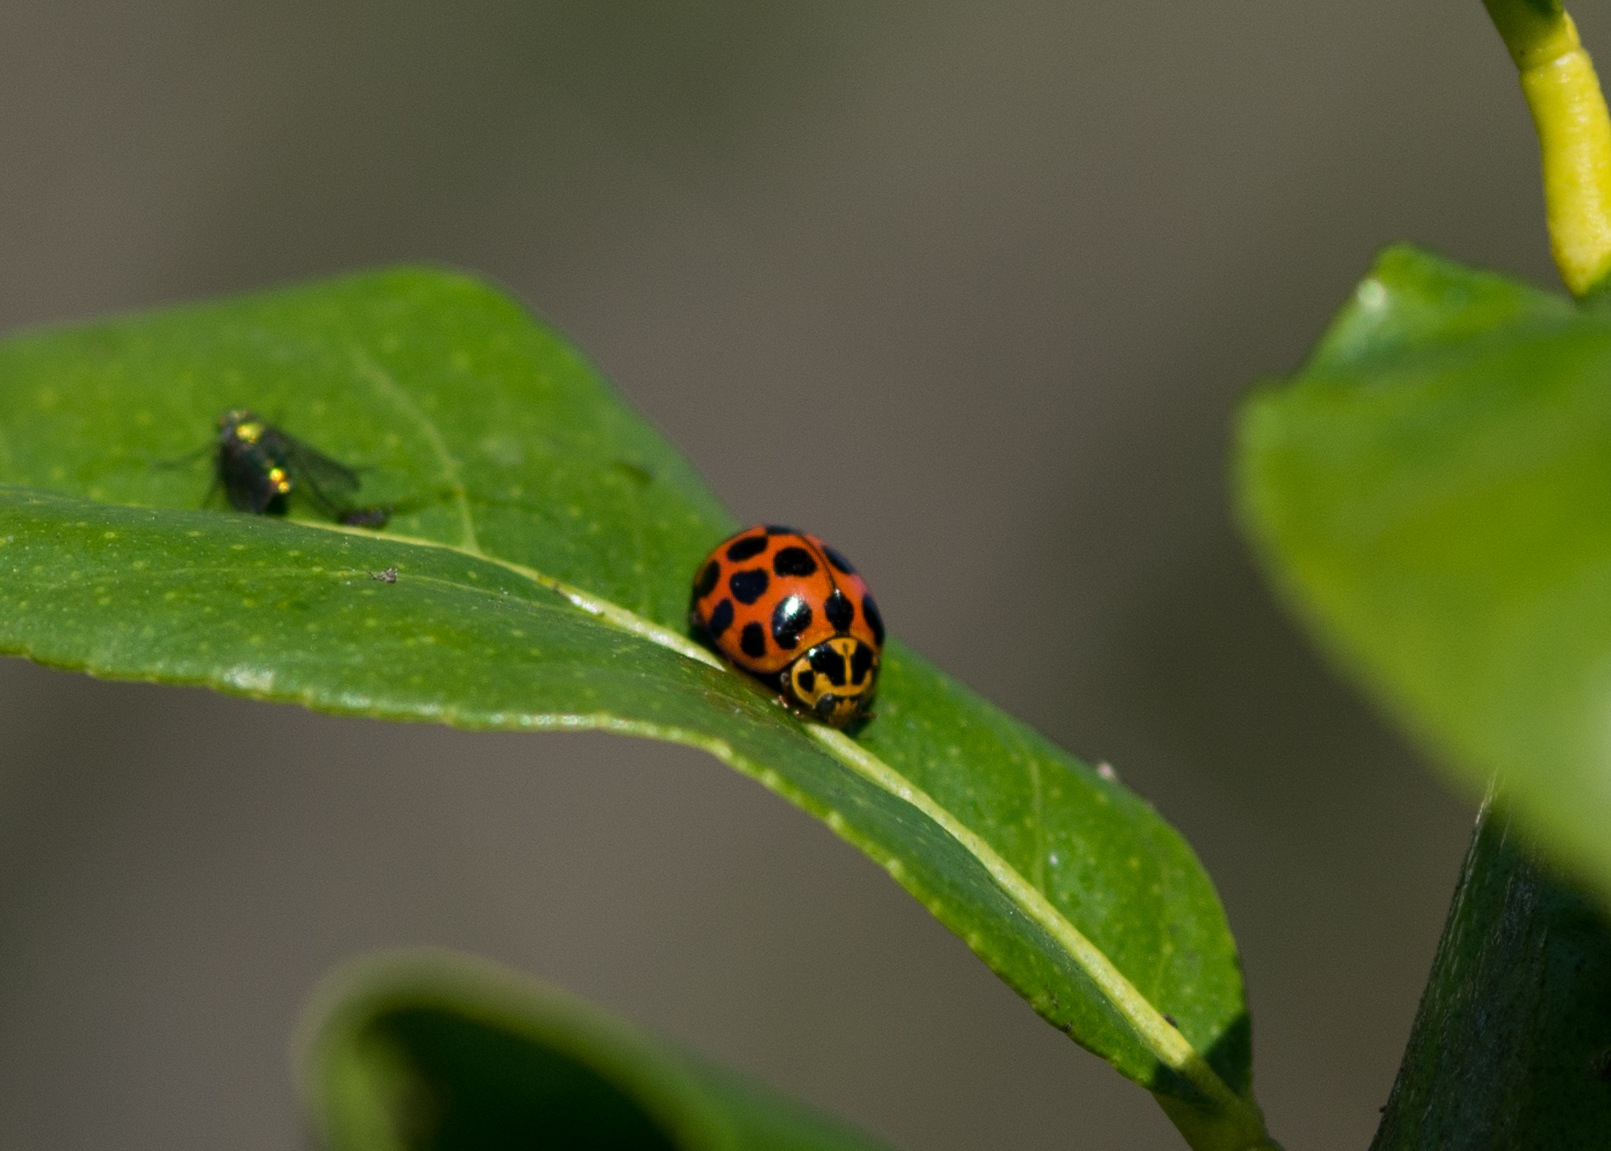  Common spotted ladybird